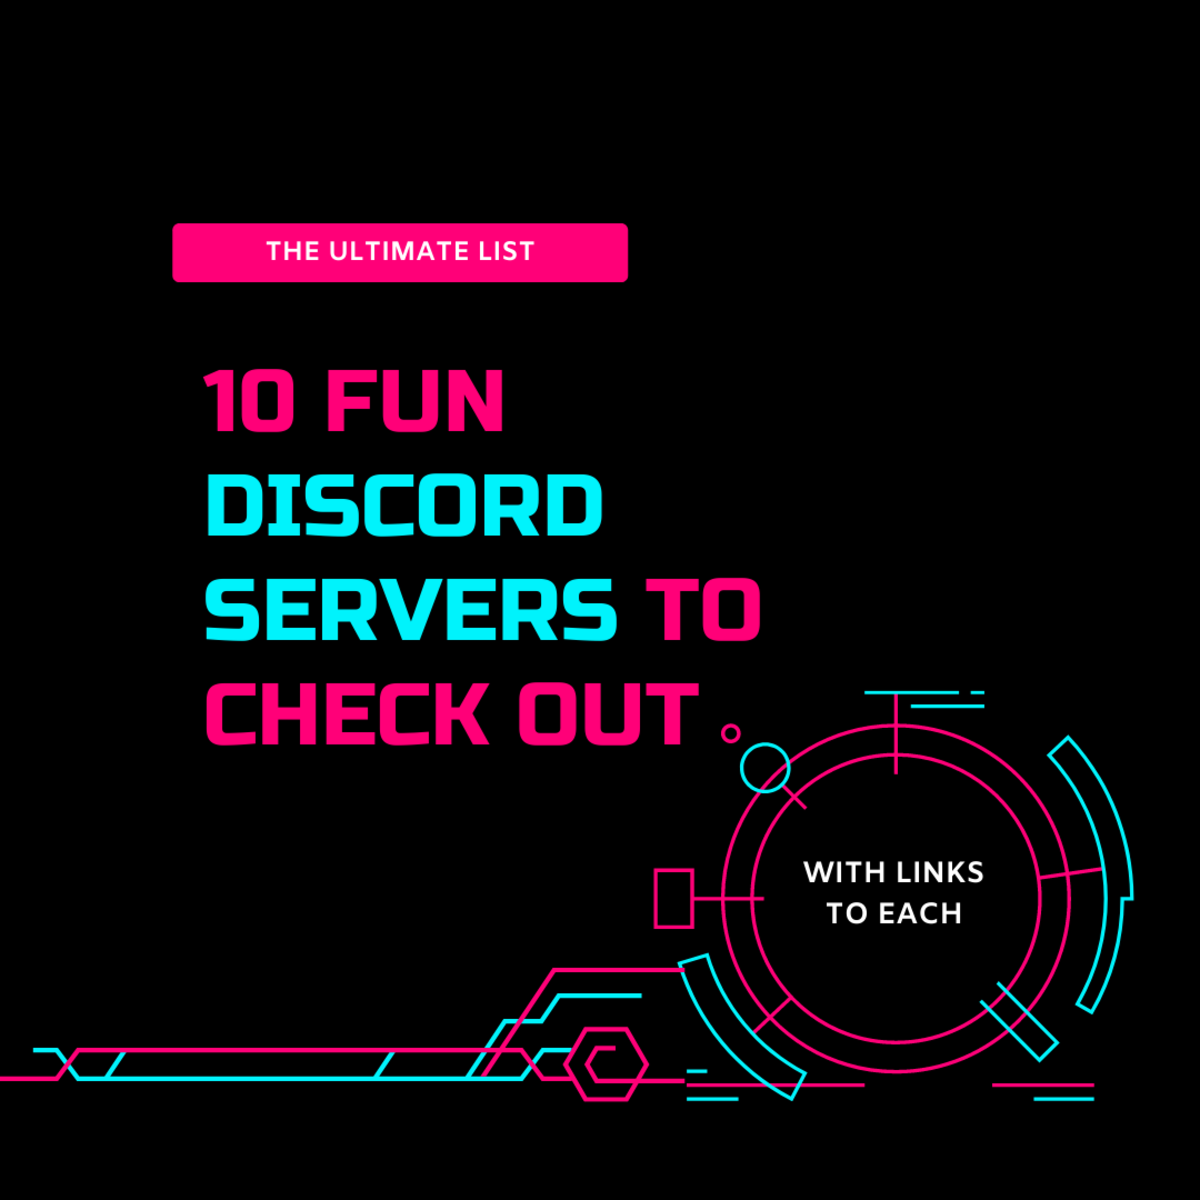 Discover 10 fun Discord servers to check out in this ultimate list!